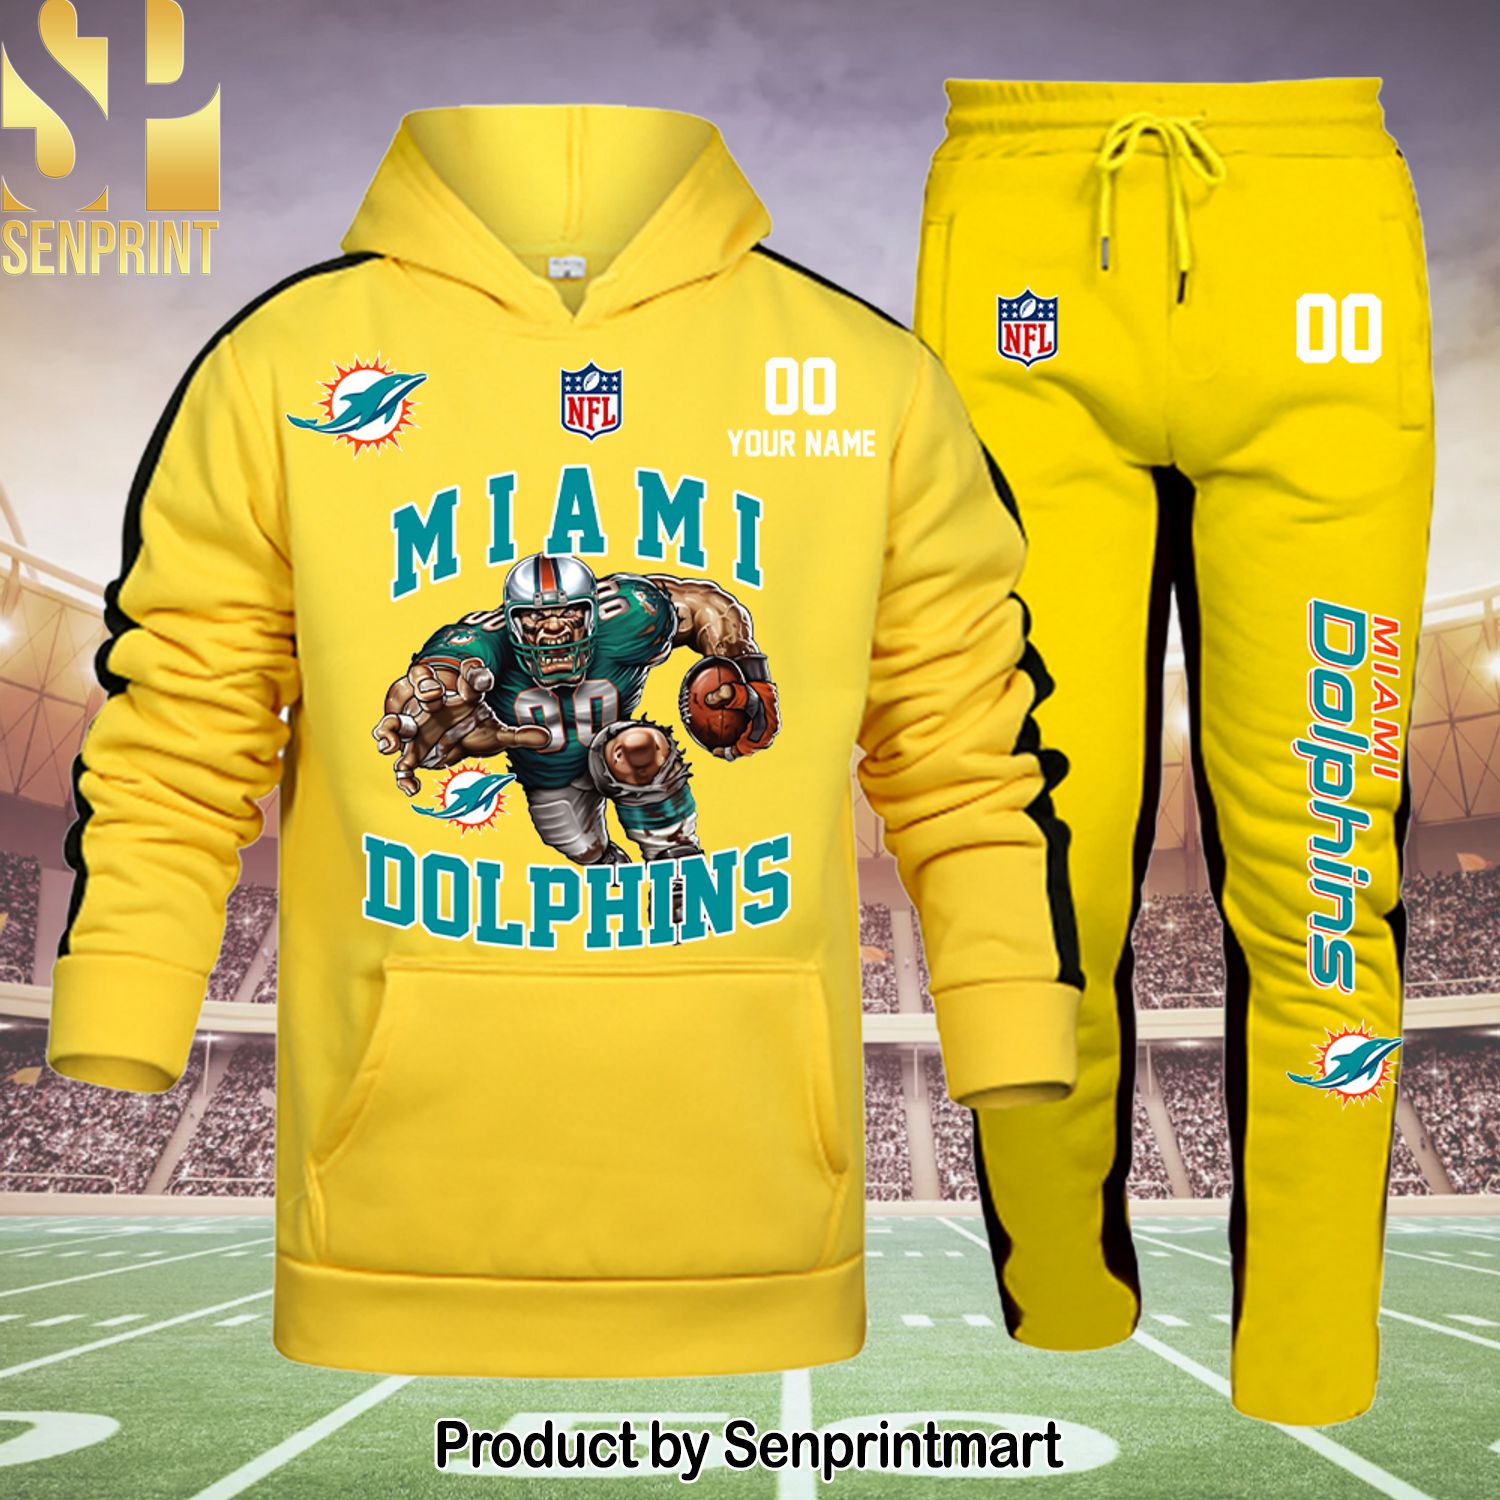 Miami Dolphins All Over Printed Classic Shirt and Pants